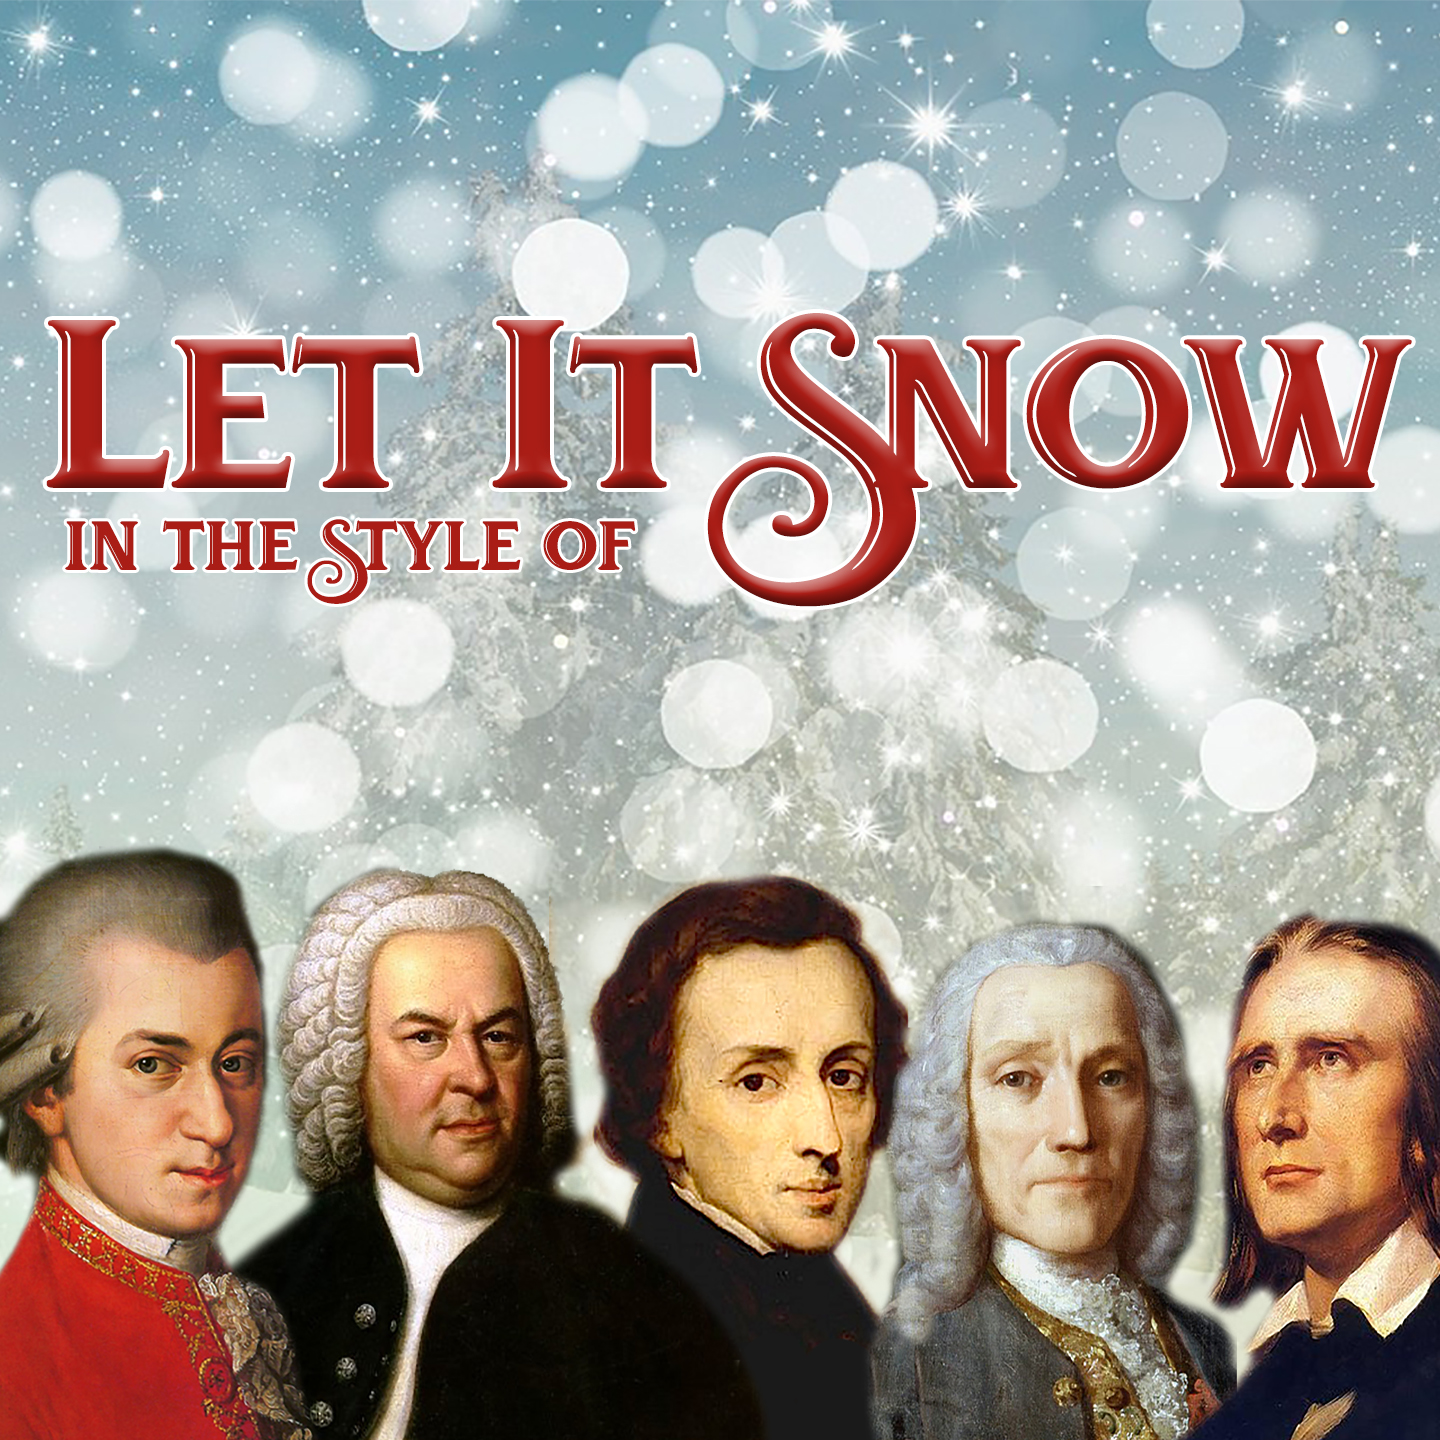 Let It Snow in the style of Bach, Scarlatti, Mozart, Beethoven, Chopin, Liszt